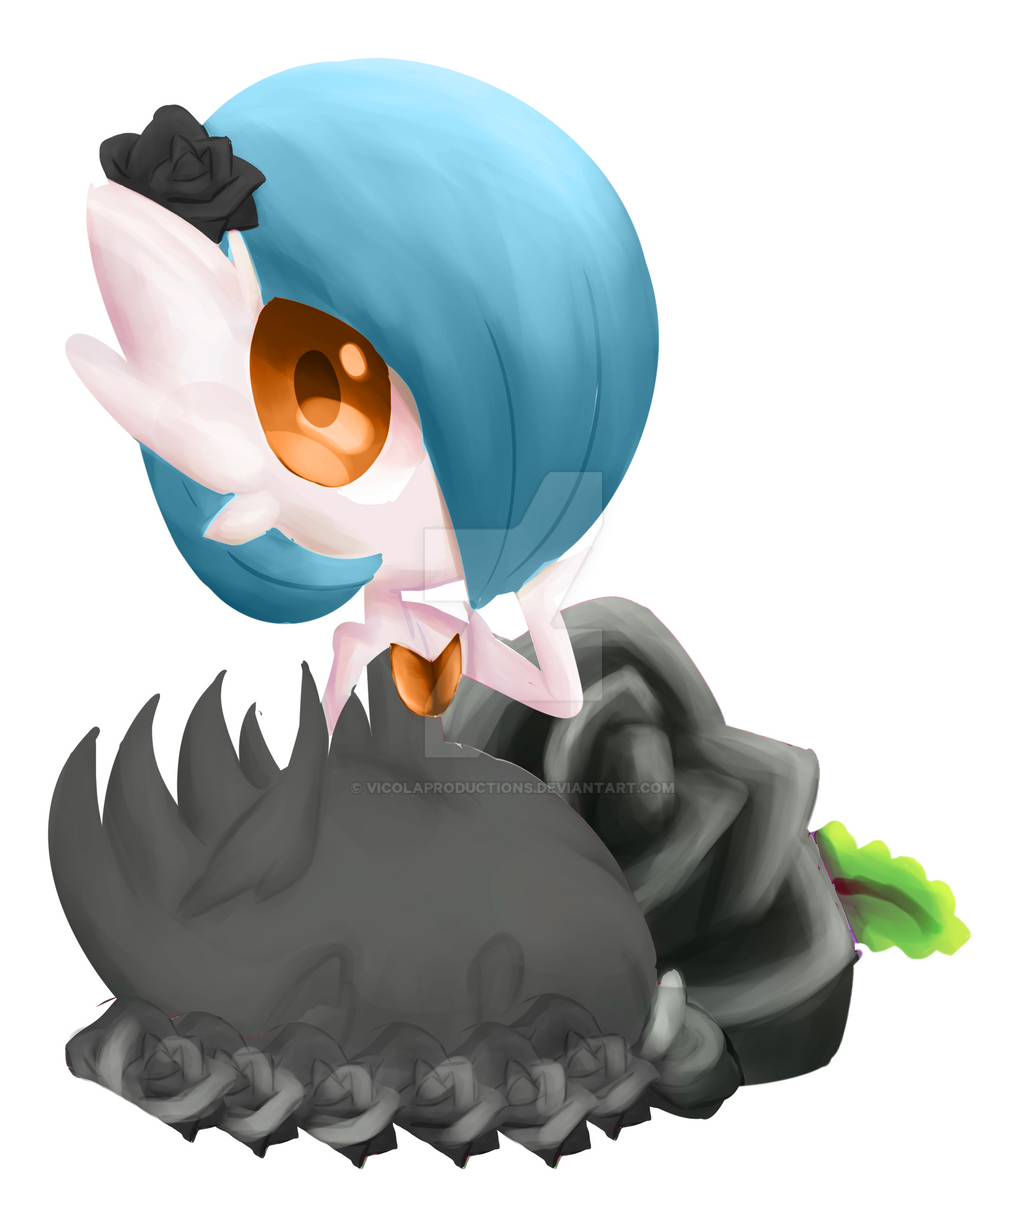 pegatinas pokemon Gardevoir 2.0 shiny by vicolaproductions on